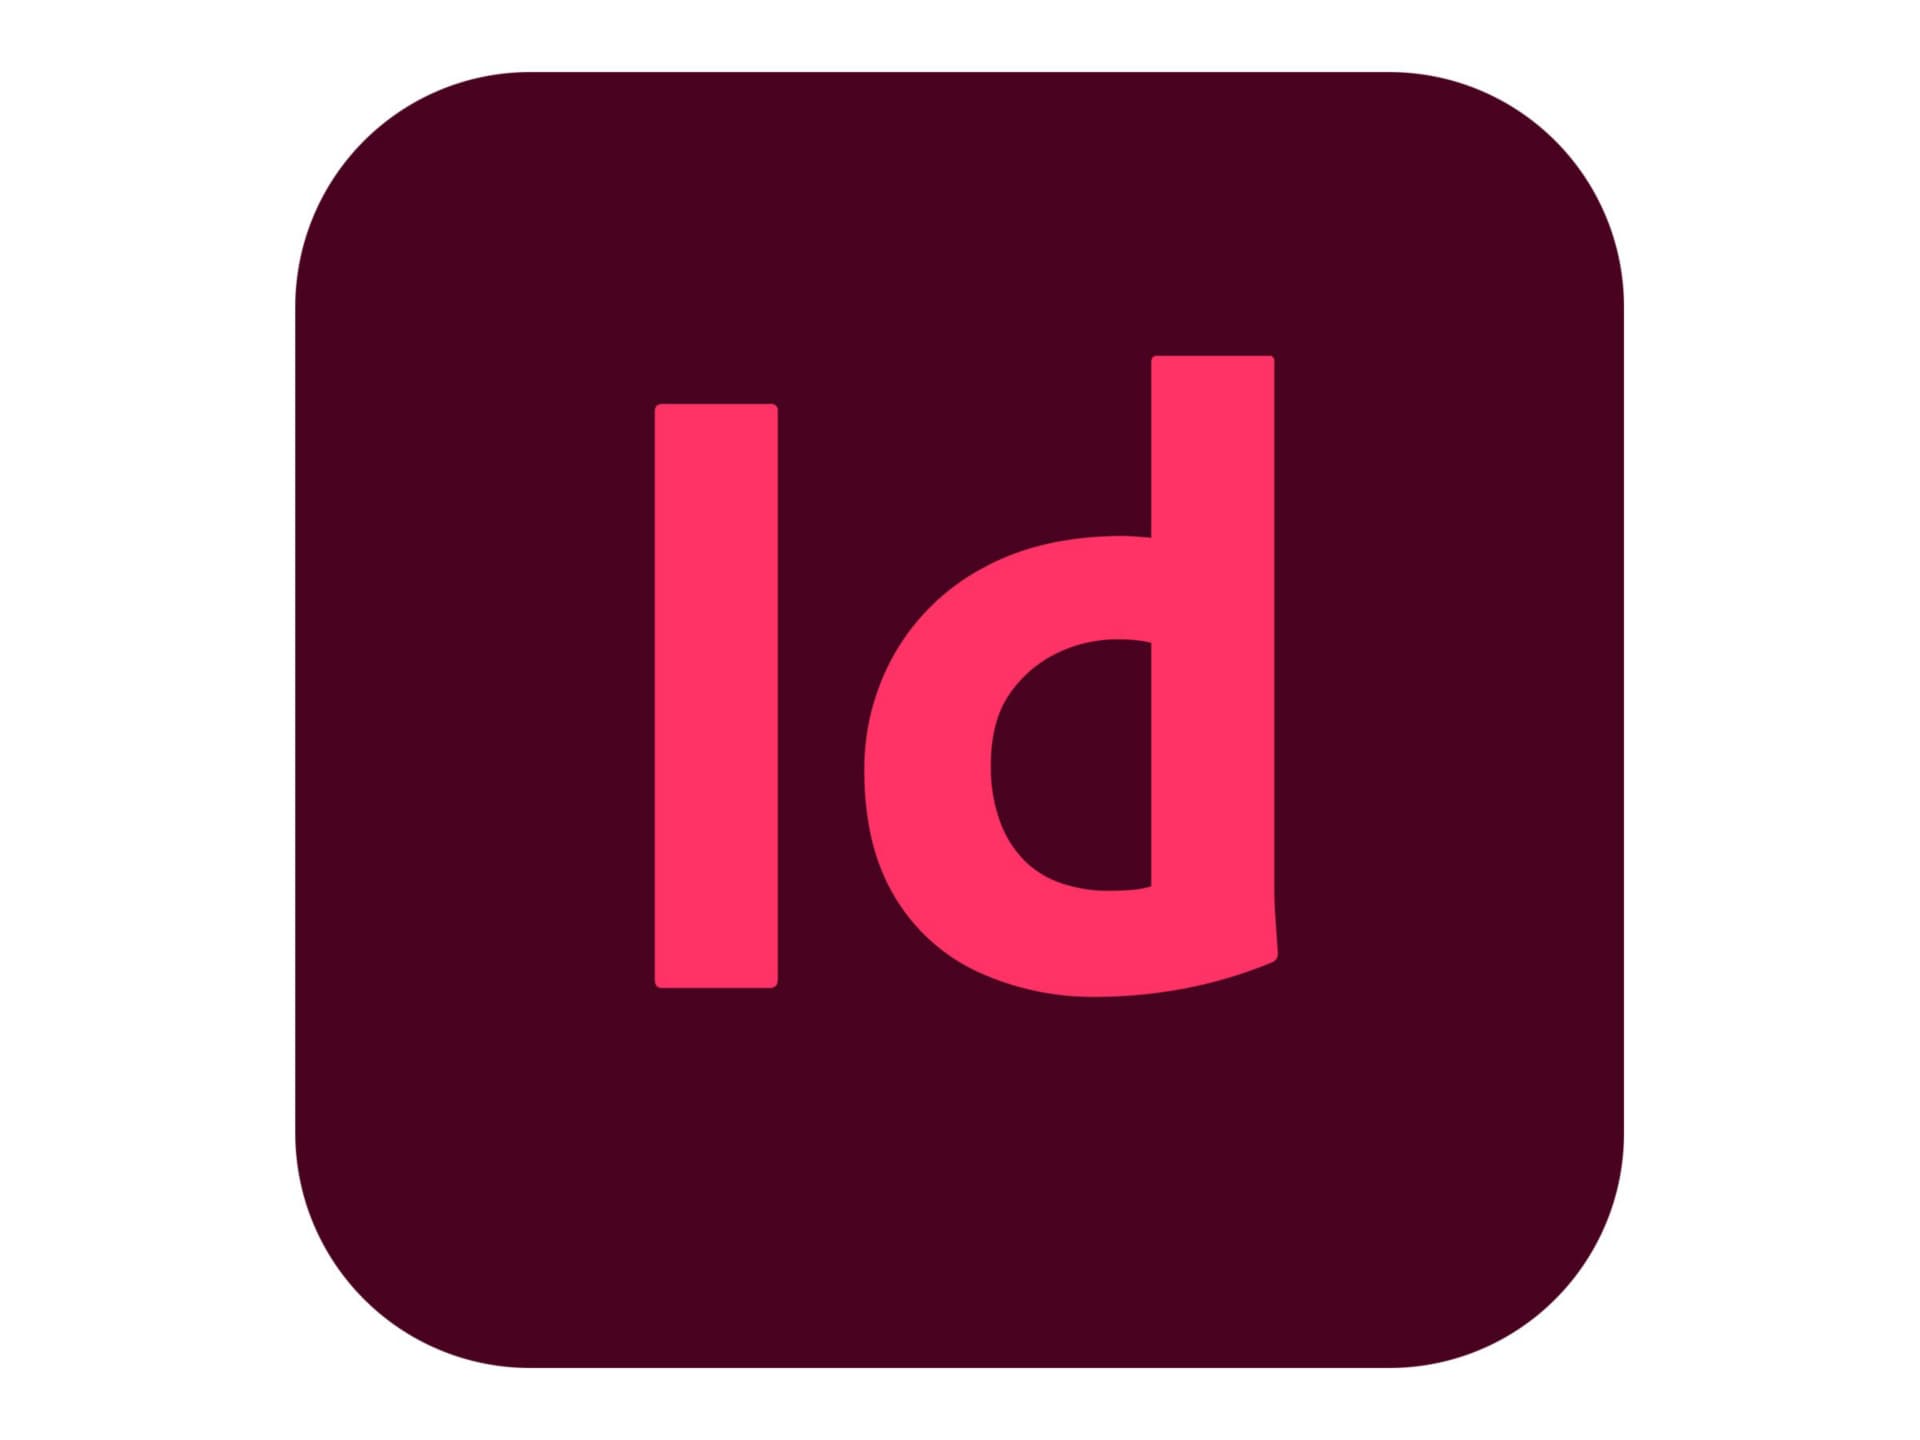 Adobe InDesign CC for teams - Subscription New (10 months) - 1 named user